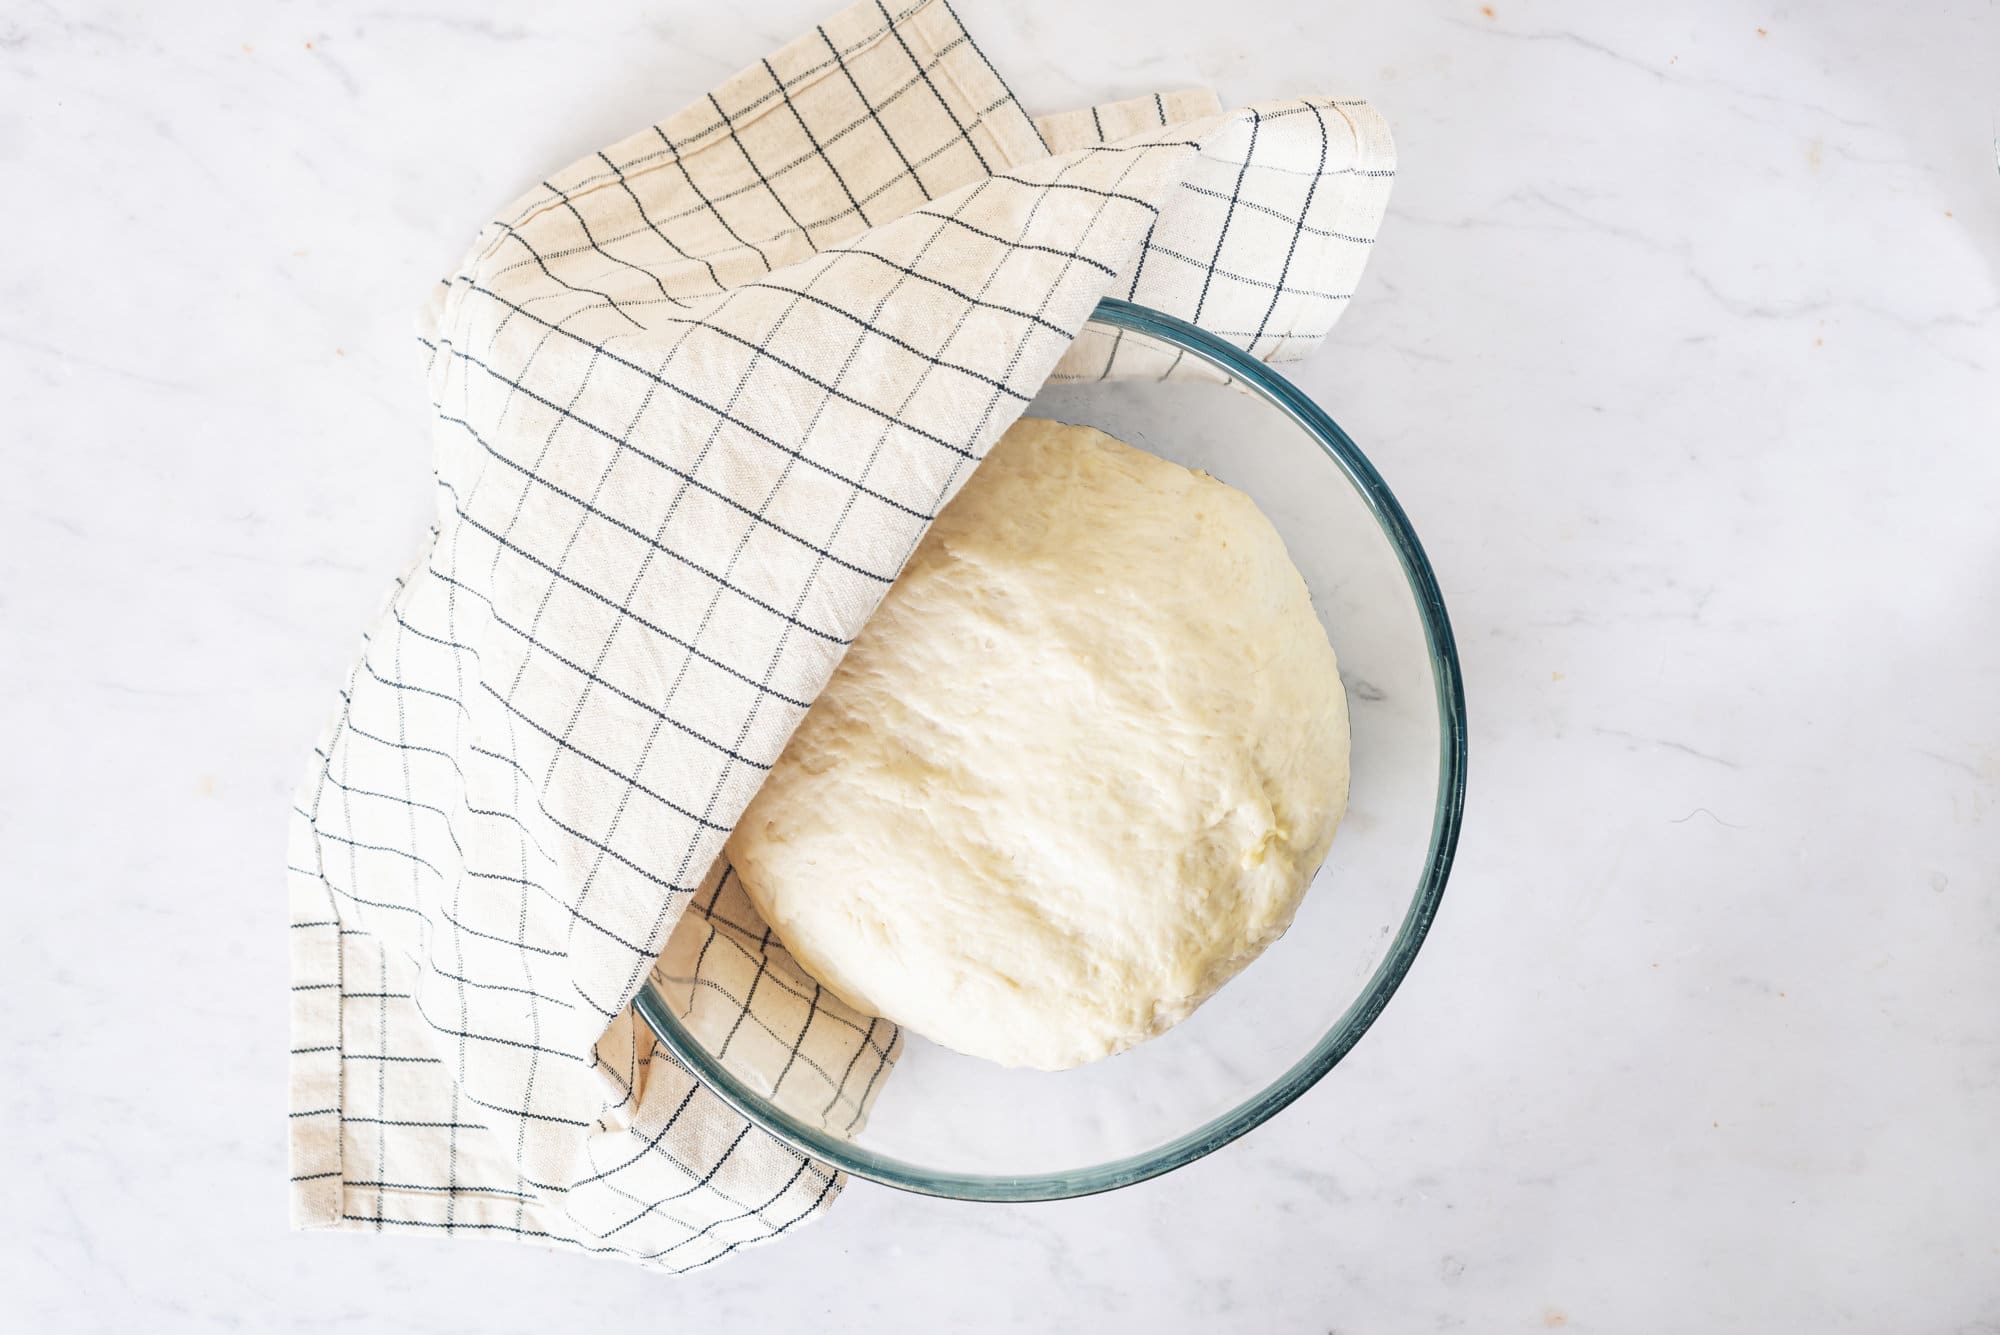 dough-in-a-glass-bowl-half-covered-by-a-white-towel